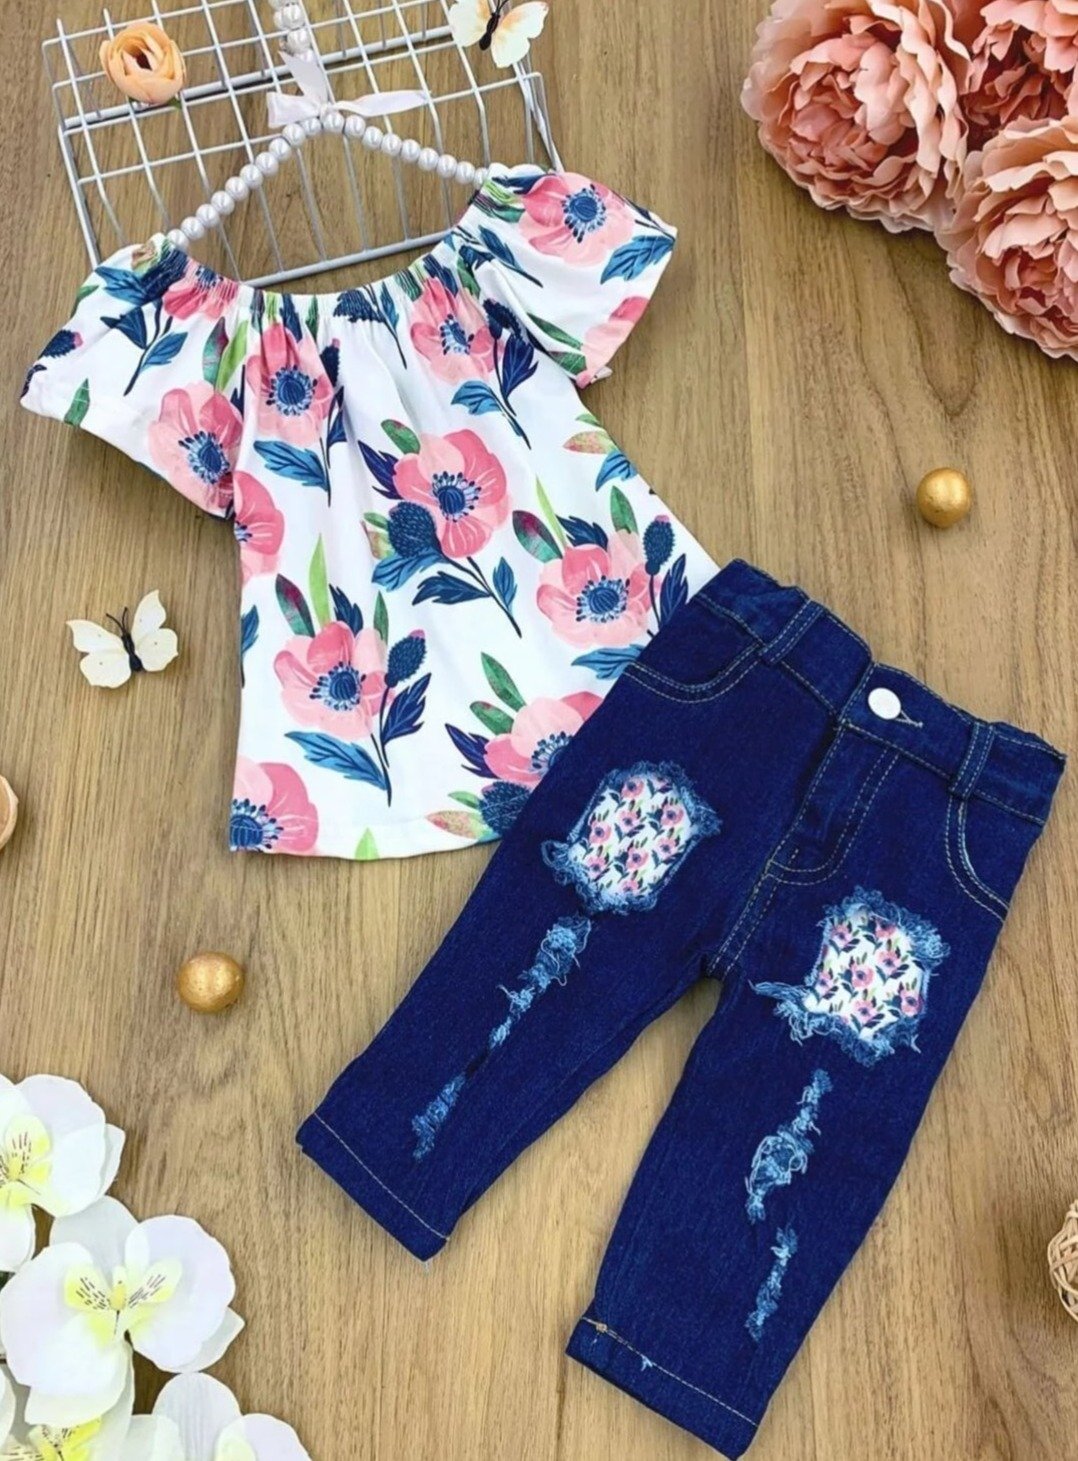 Toddler Spring Outfits | Floral Ruffle Top & Patched Denim Capris Set